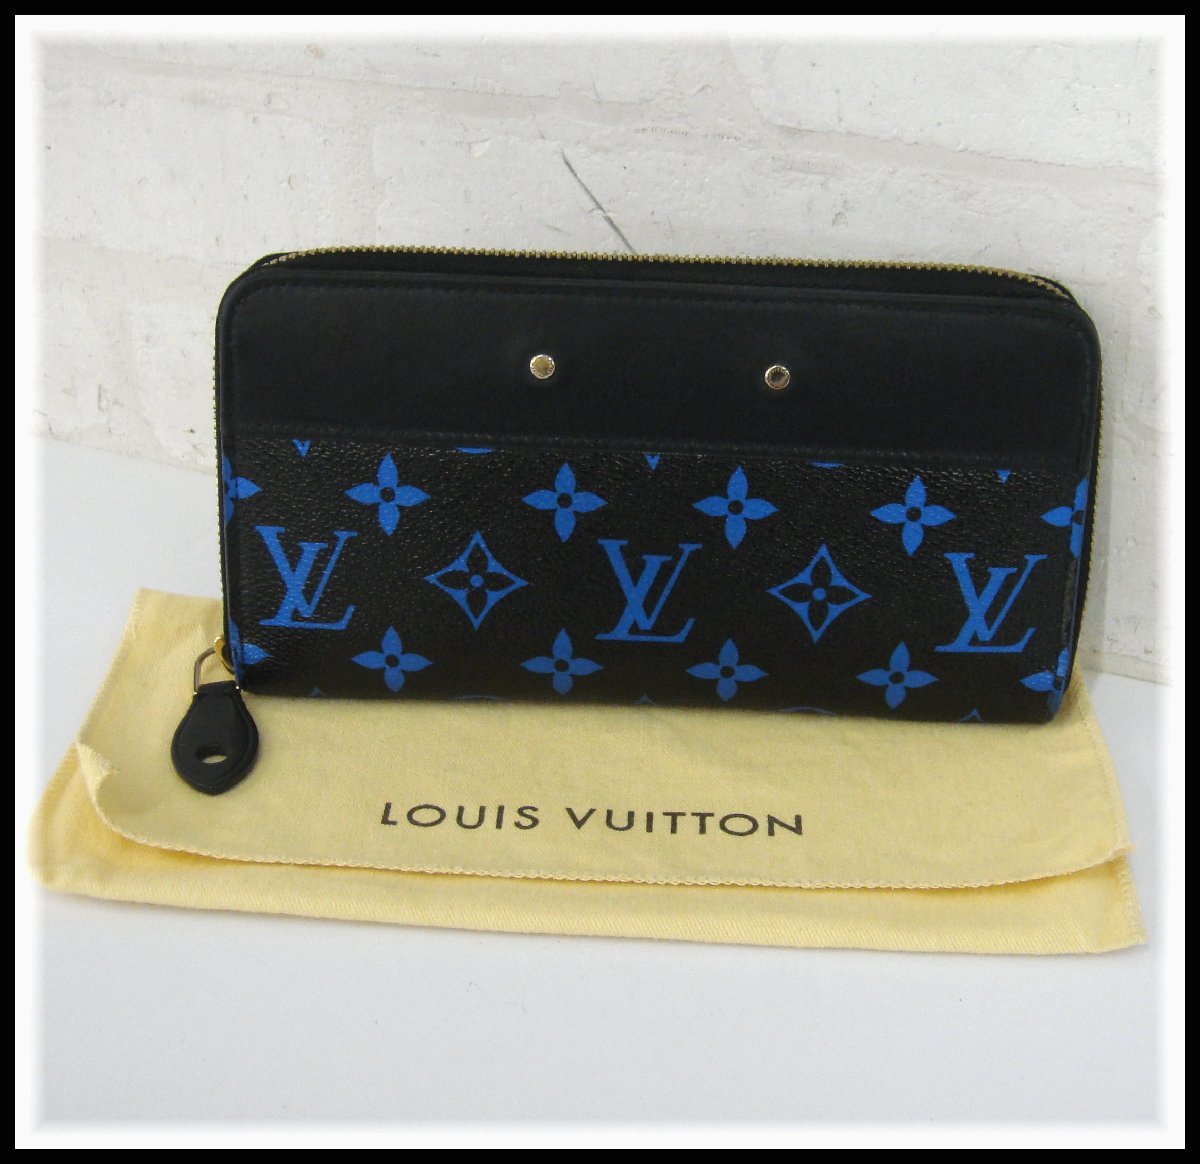 5131T【本物保証】 LOUIS VUITTON ルイヴィトン ジッピーウォレット